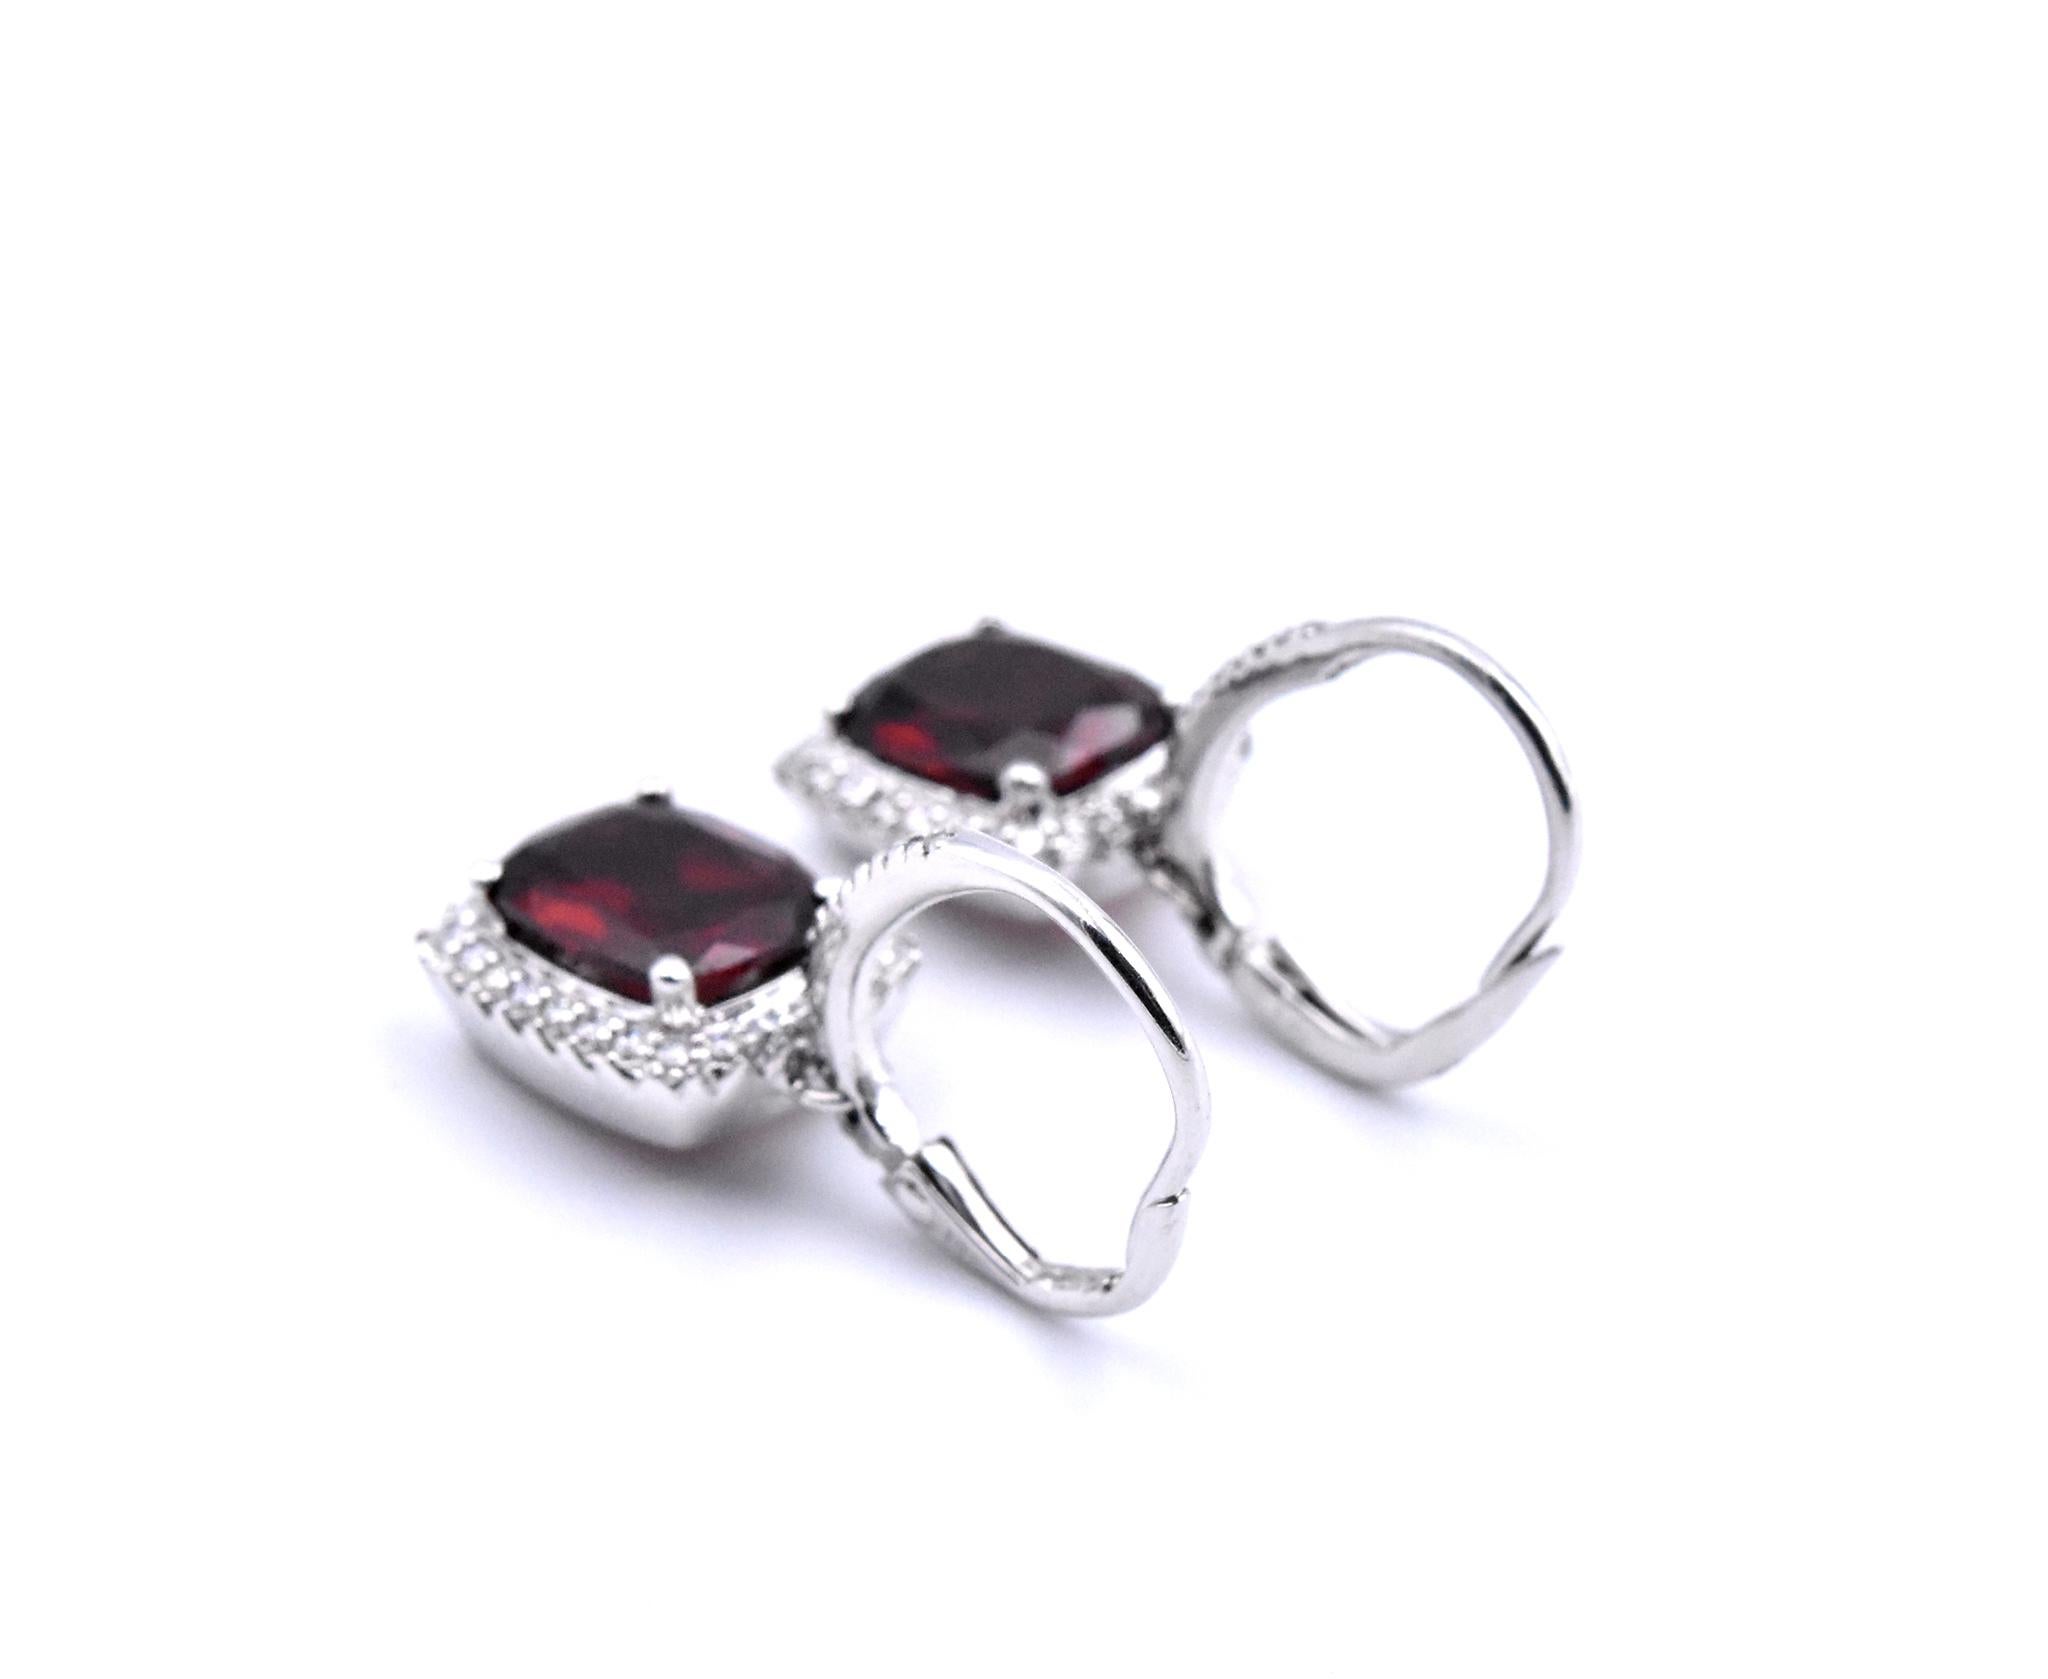 14 Karat White Gold Diamond and Garnet Dangle Earrings In Excellent Condition For Sale In Scottsdale, AZ